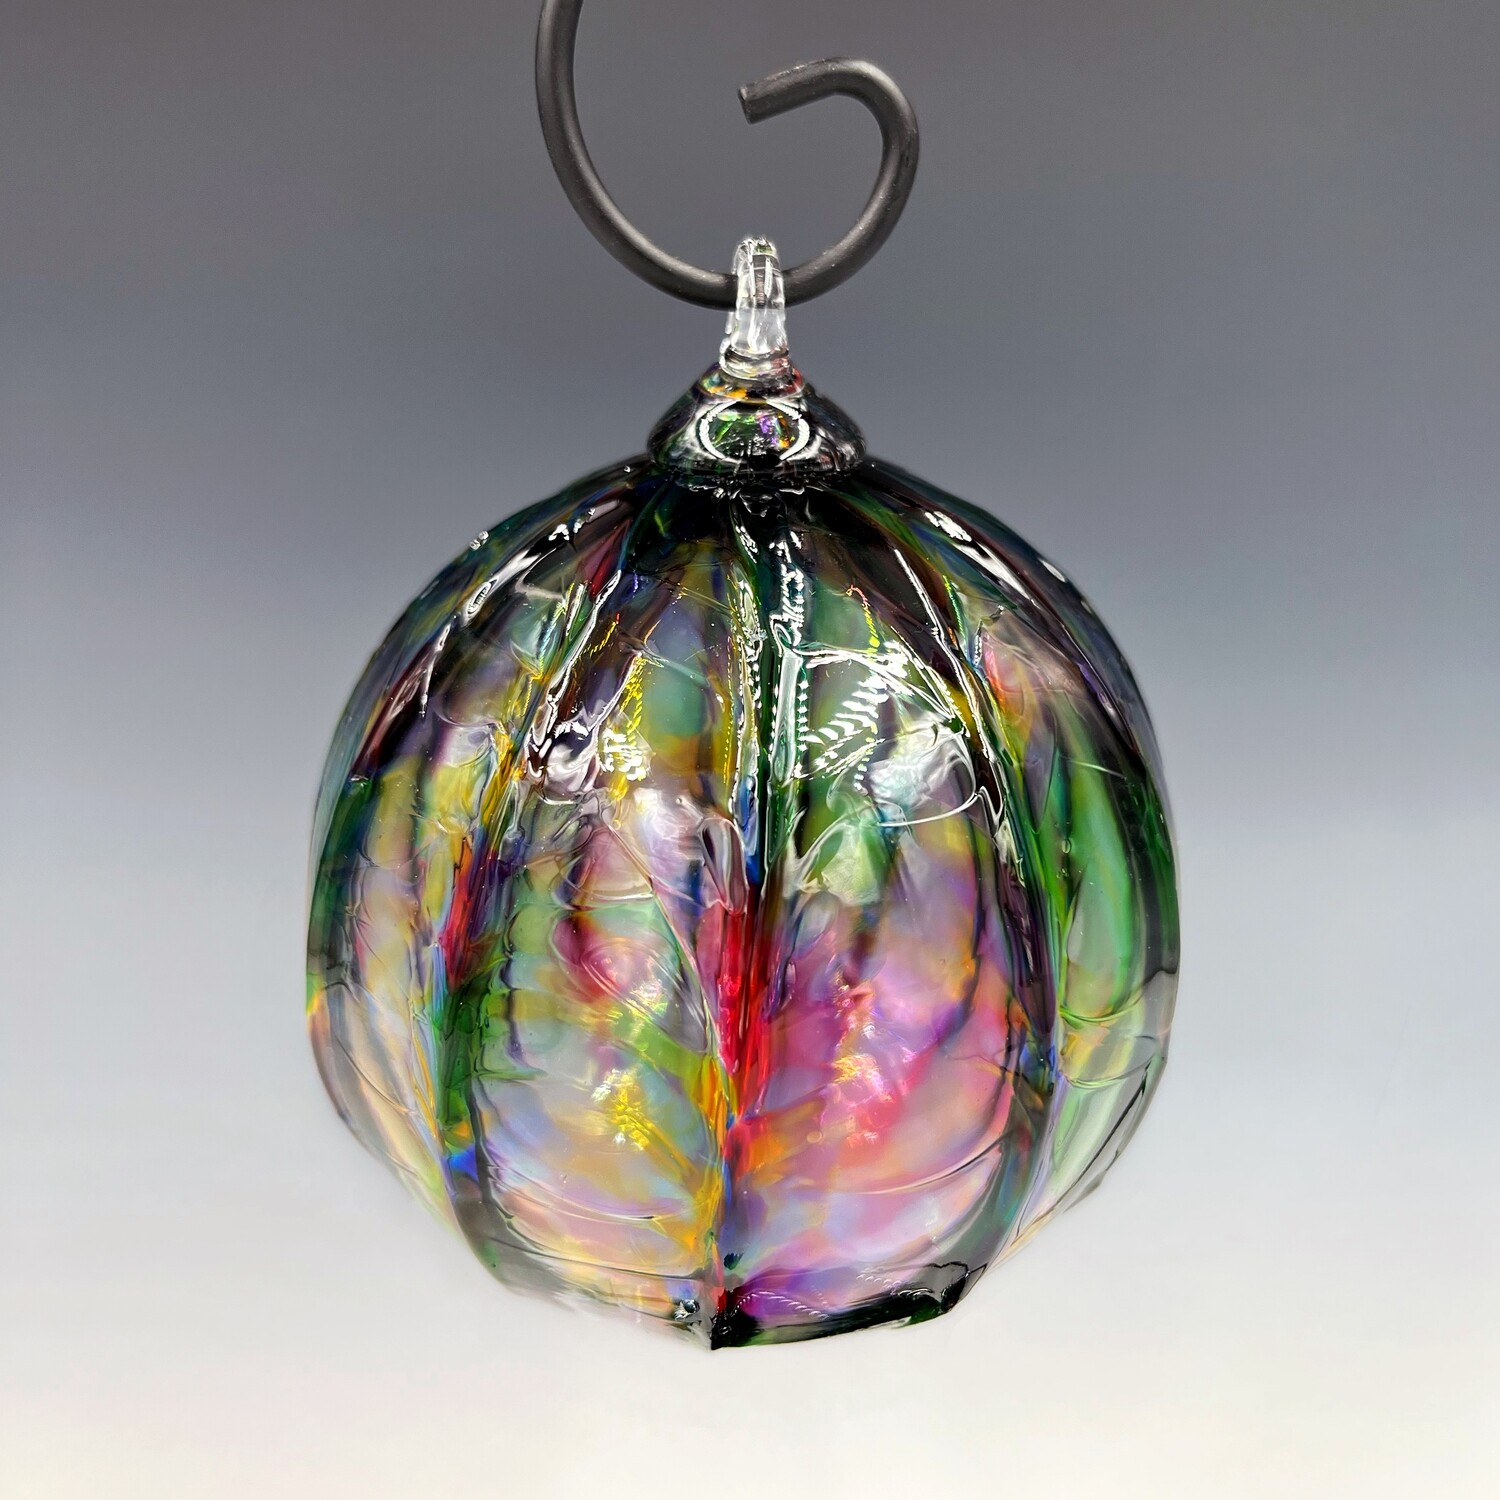 Glass Ornament in Fruit Salad Mix